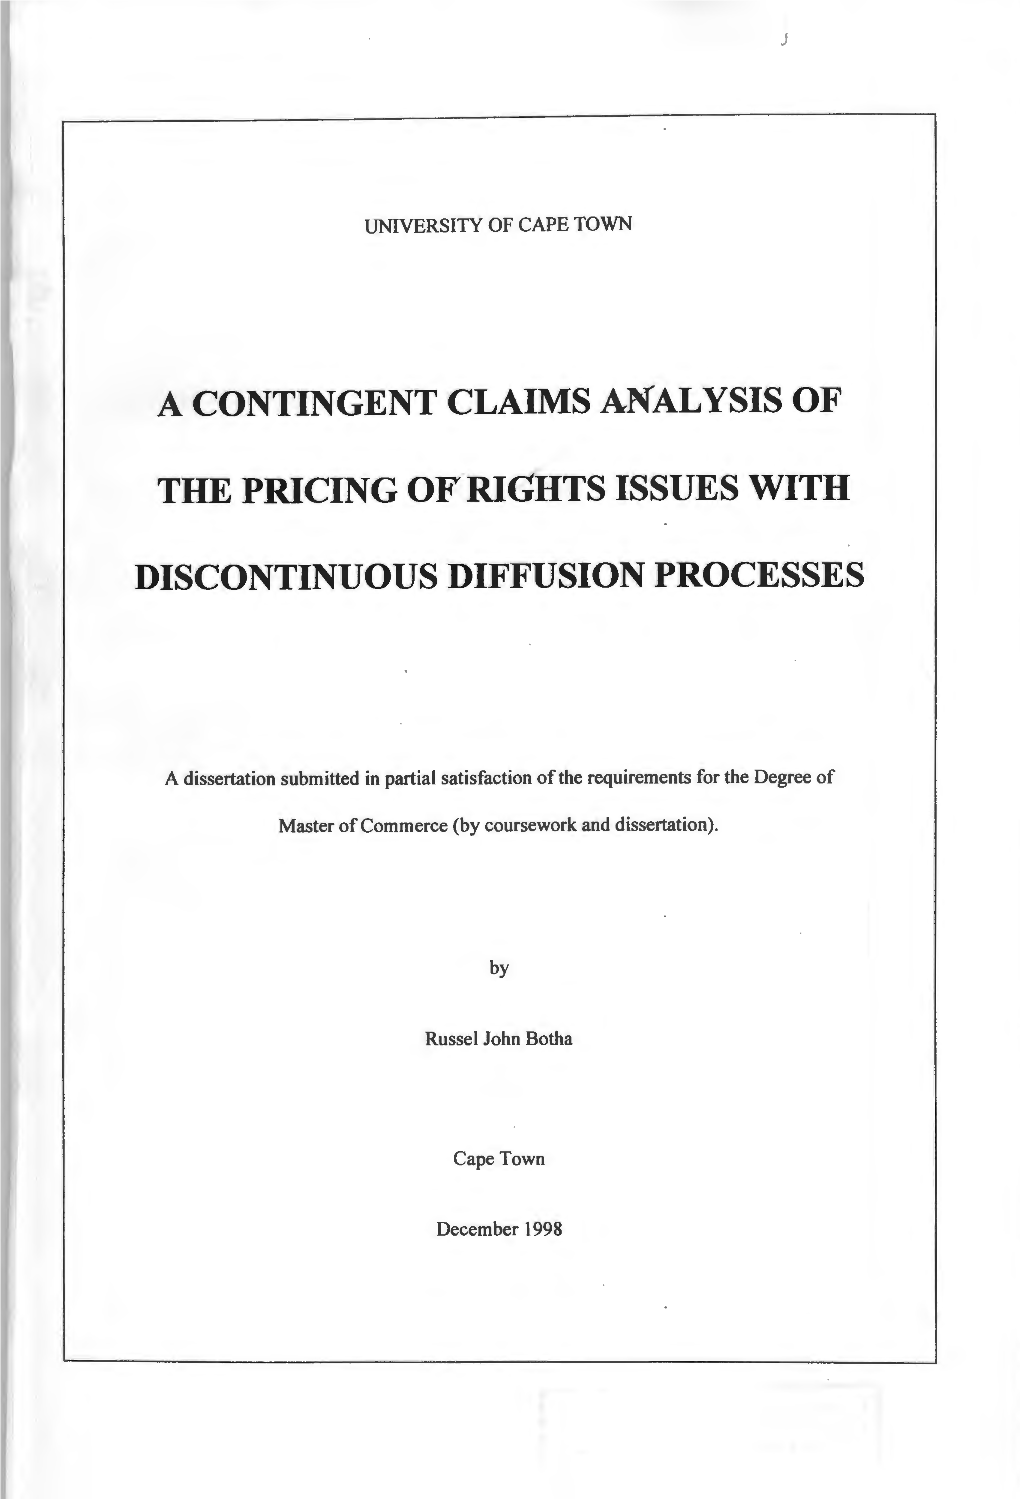 A Contingent Claims Analysis of the Pricing of Rights Issues with Discontinuous Diffusion